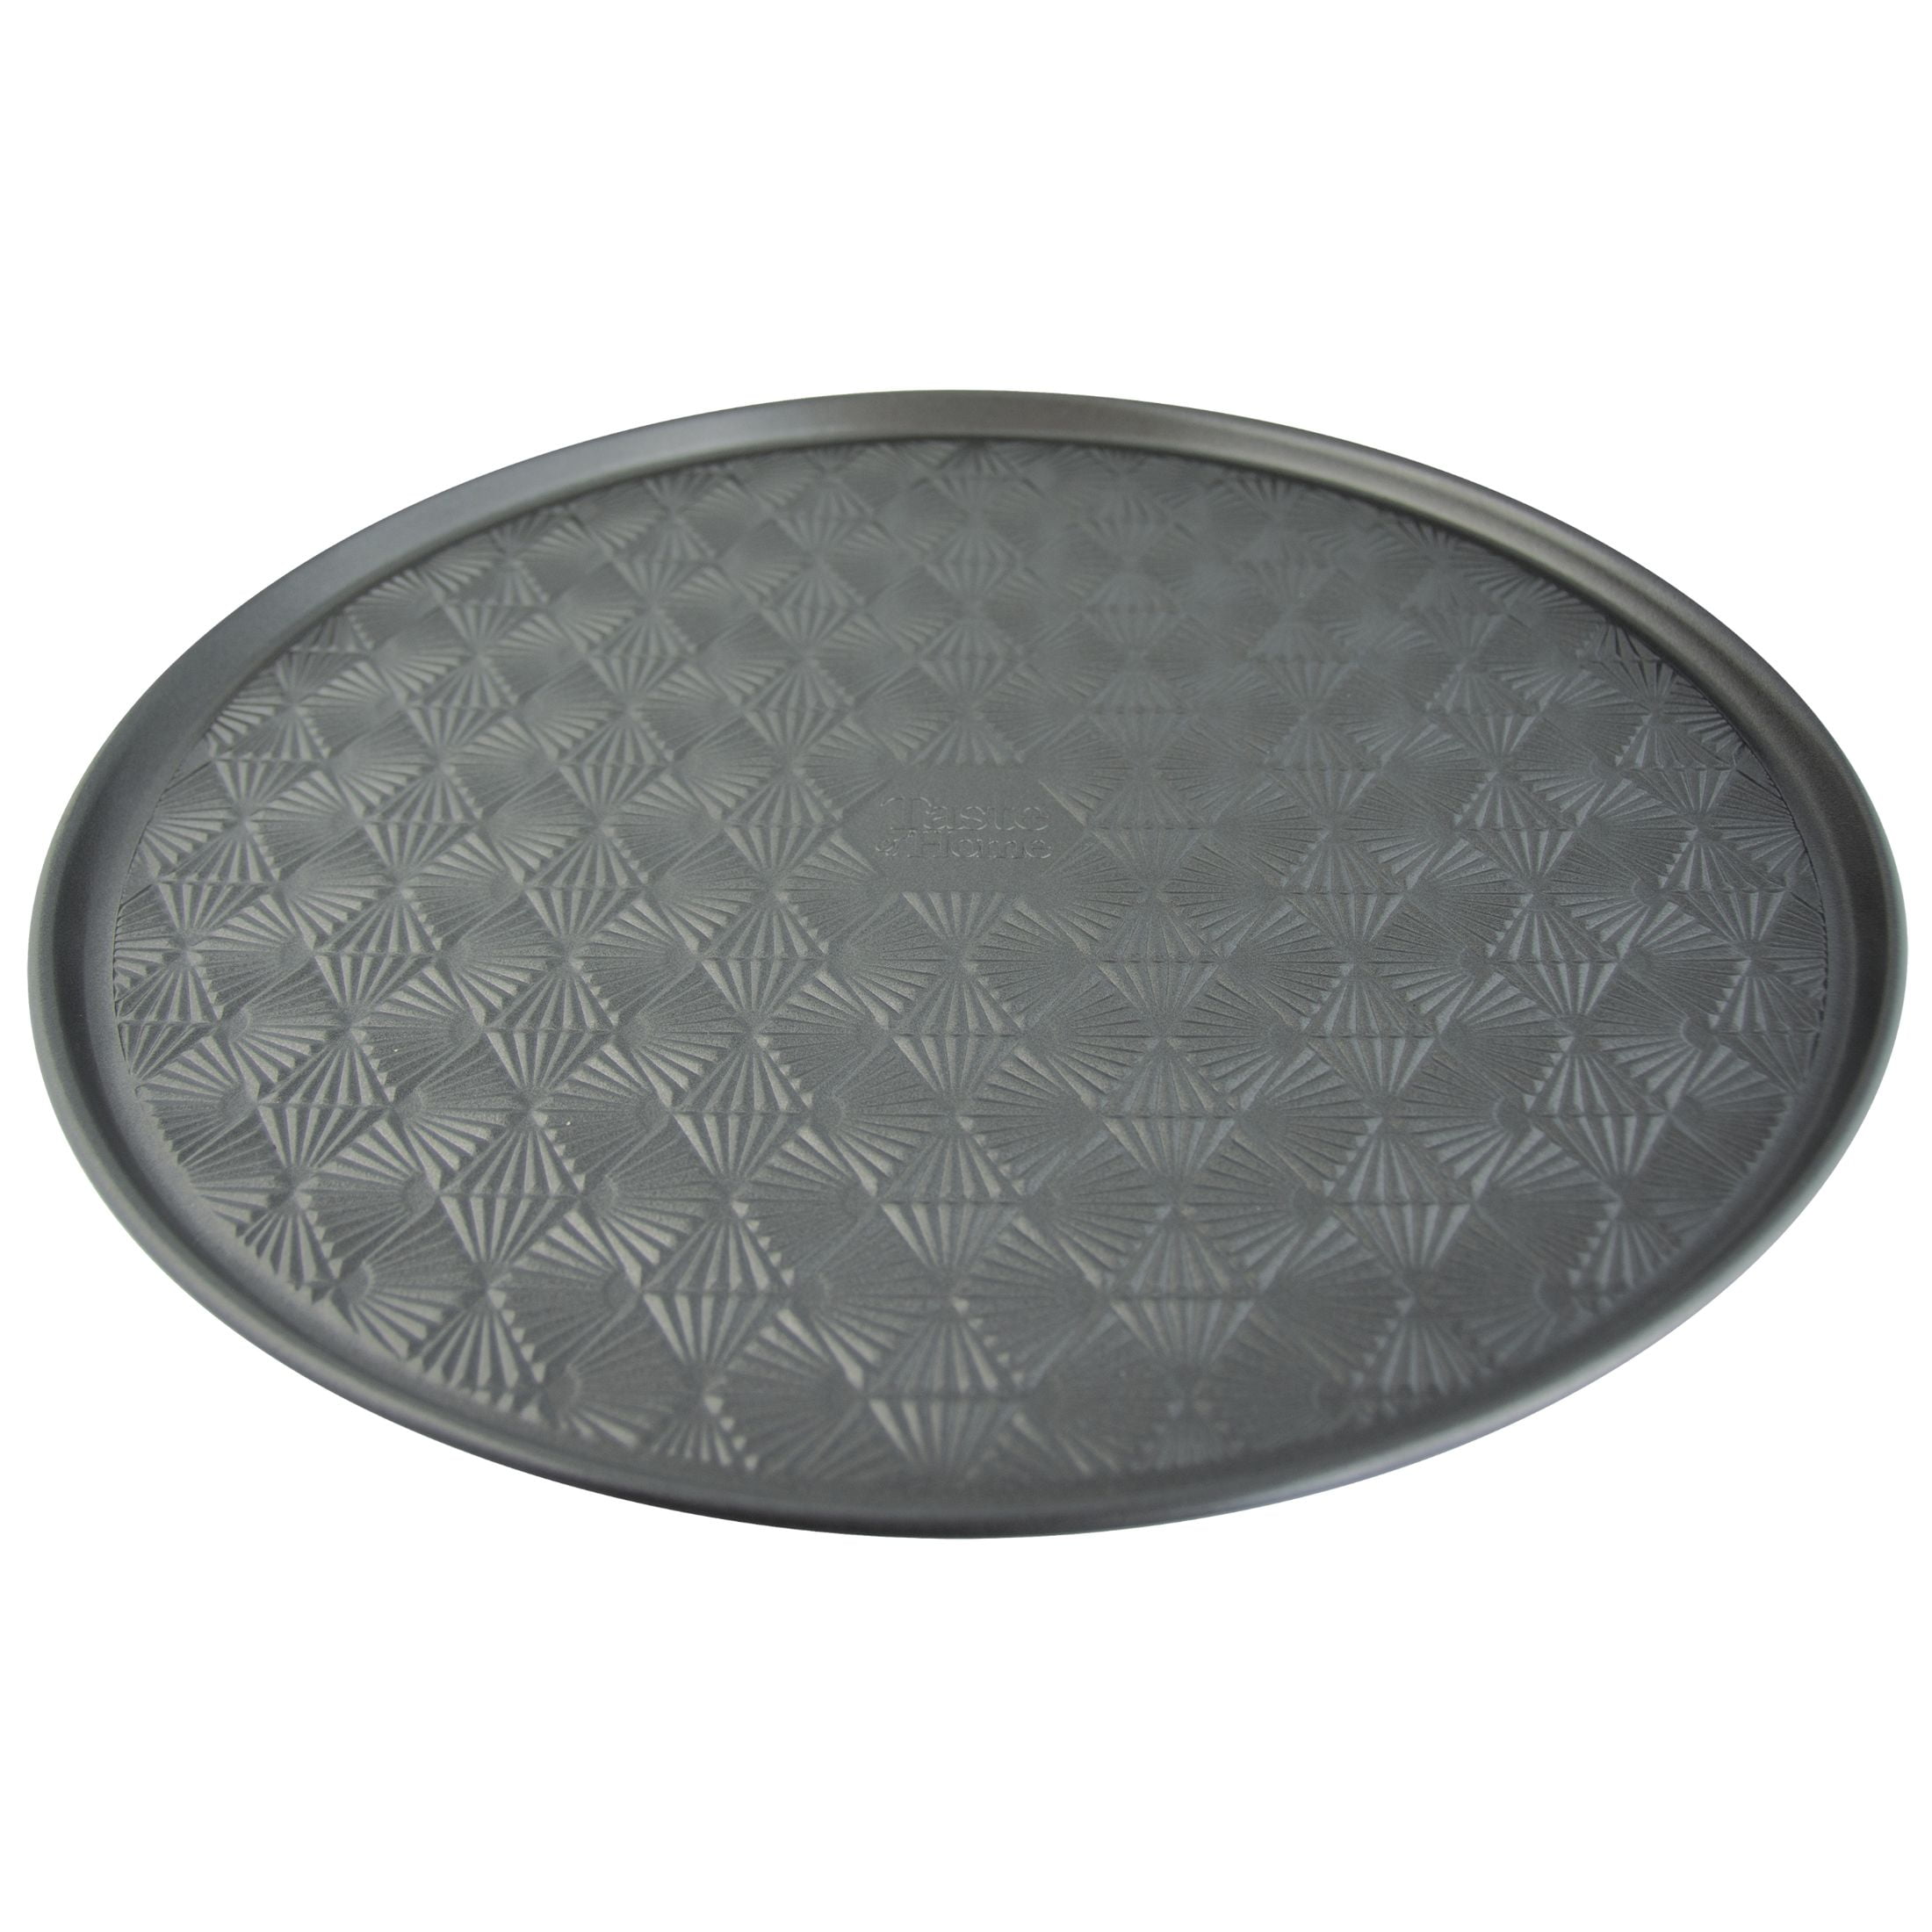 California Home Goods Cast Iron 14-Inch Pre-Seasoned Pizza Pan $24.95 from  $60 - Best Price! 